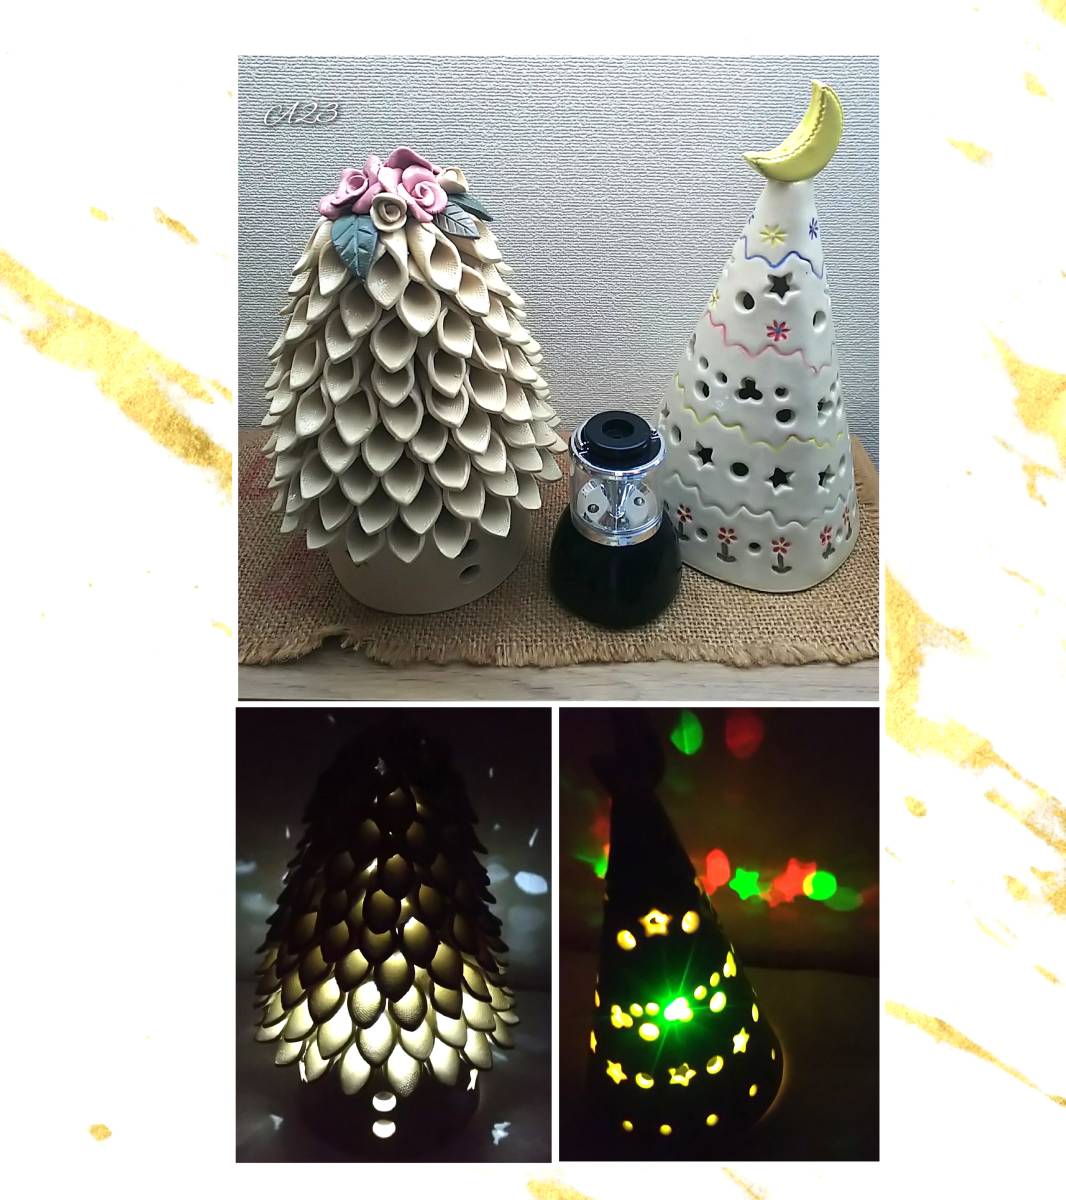 Handmade★2 lovely tree-shaped lantern covers (ceramic), 1 mini lantern, set of 3, ornament, decoration, unused, stored item, even during power outages, handmade works, interior, miscellaneous goods, ornament, object